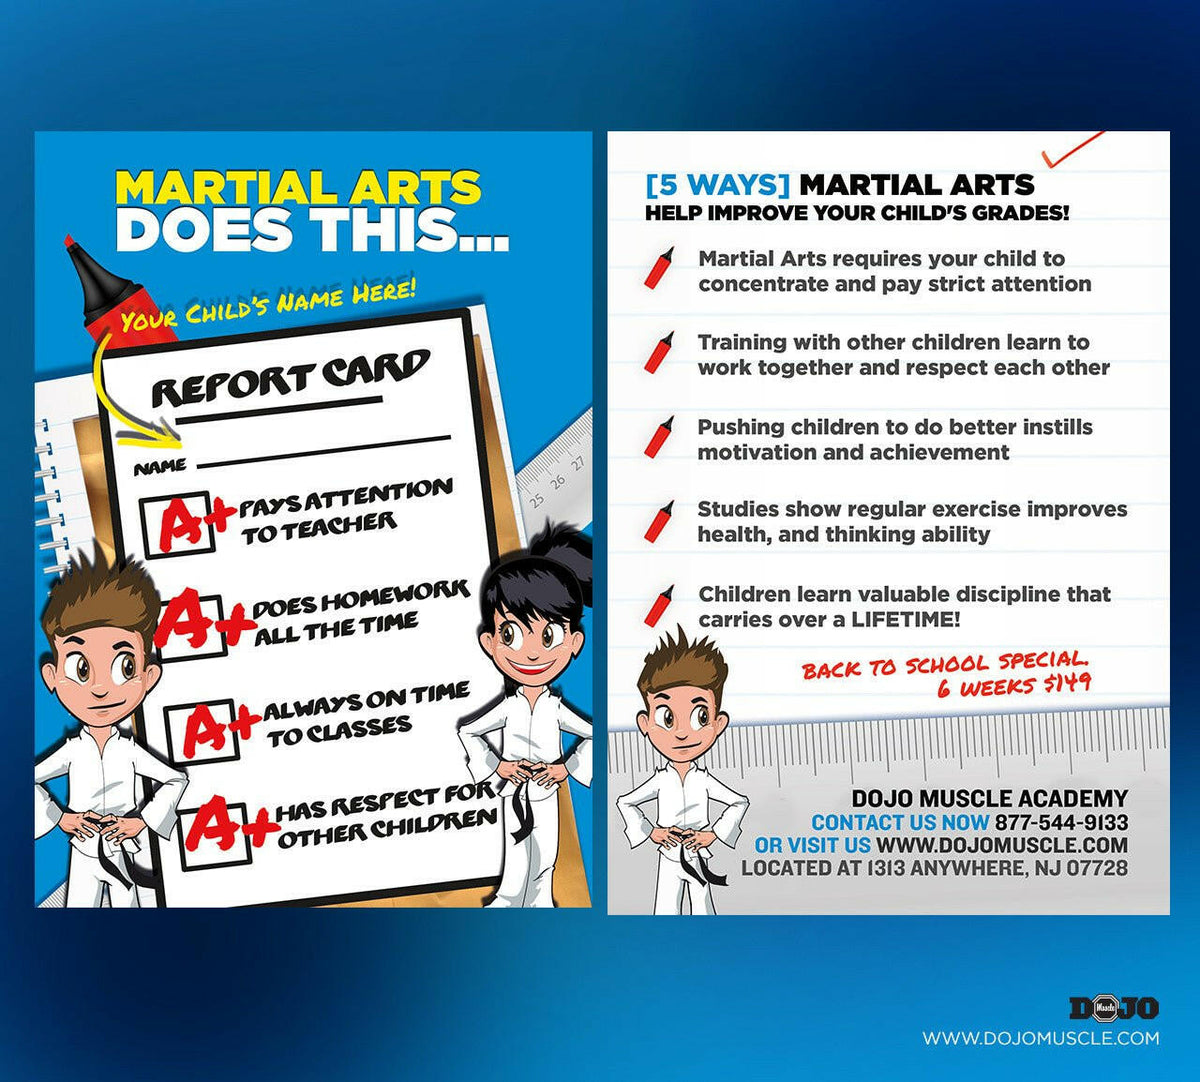 Back To School - Martial Arts Does This. Tips Card B - Dojo Muscle